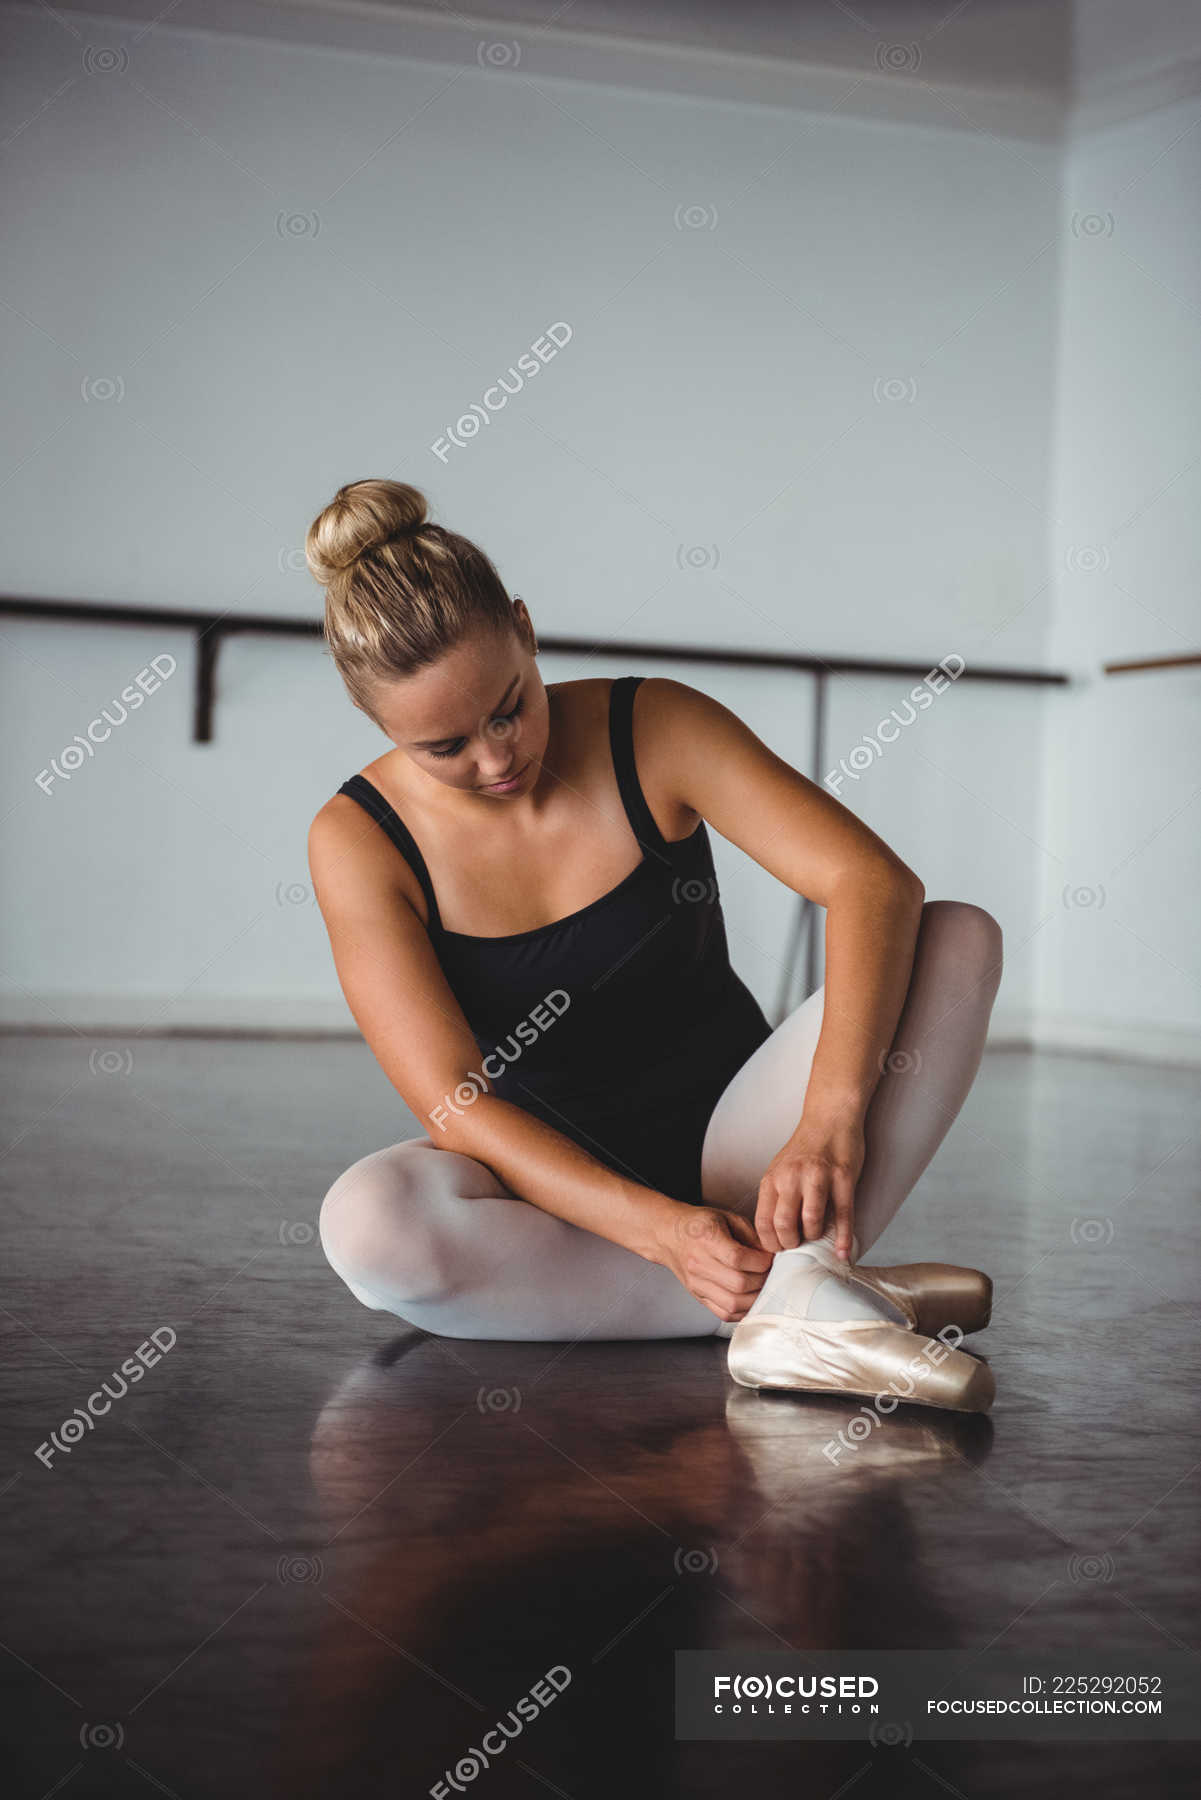 Problem Pioner offset Ballerina adjusting stockings while sitting in ballet studio — classical,  lifestyle - Stock Photo | #225292052